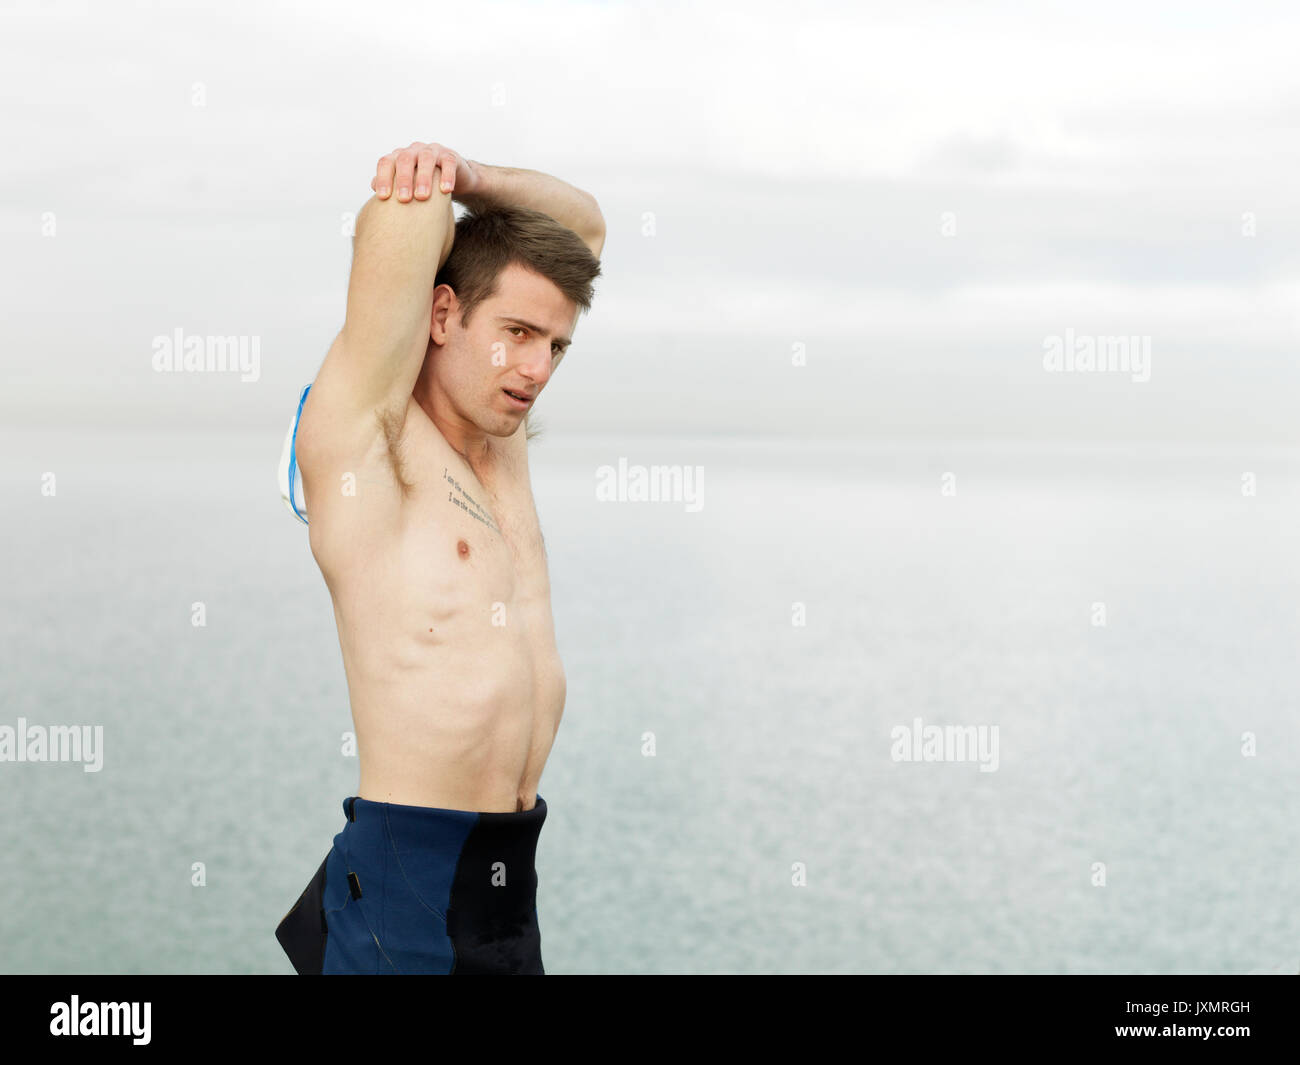 Bare chested man warming up, stretching arms, Melbourne, Victoria, Australia, Oceania Stock Photo